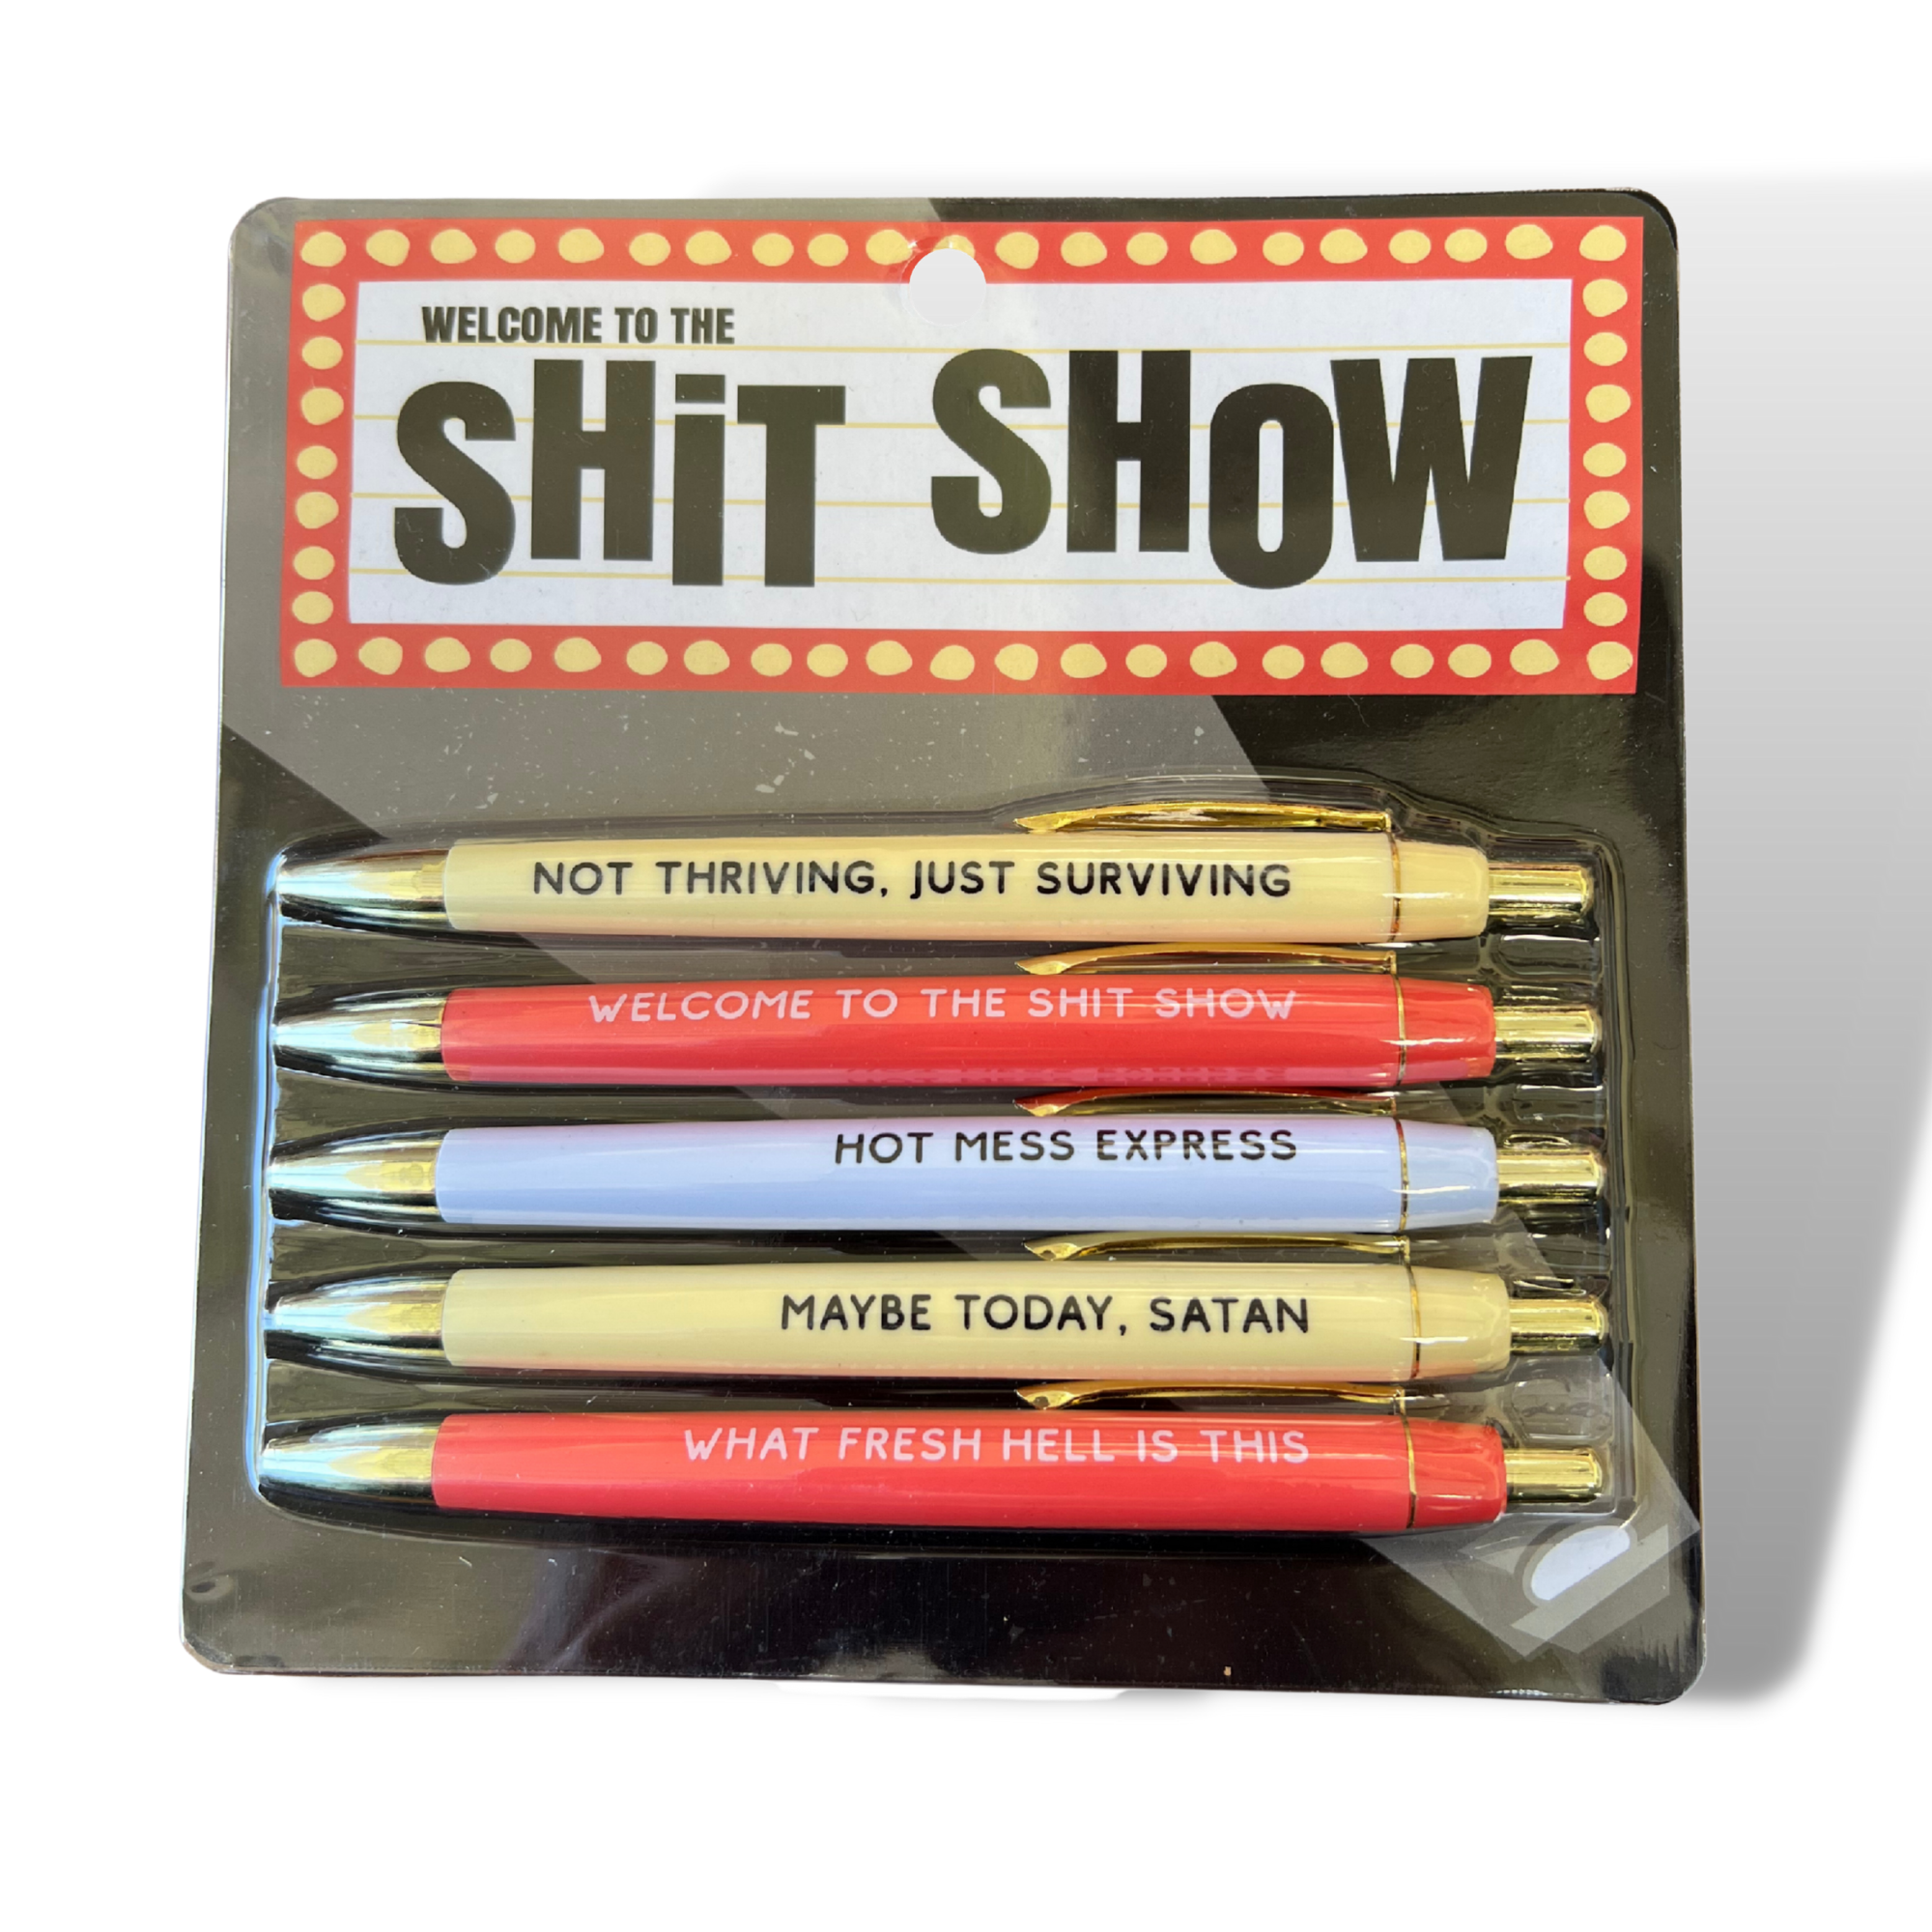  The Shit Show Pens, Welcome to the Shit Show Pen Set, Funny  Pens for Adults Swearing, Funny Pens Swear Word Daily Pen Set, For Student  Gift Stationery Office Signature Multifunction